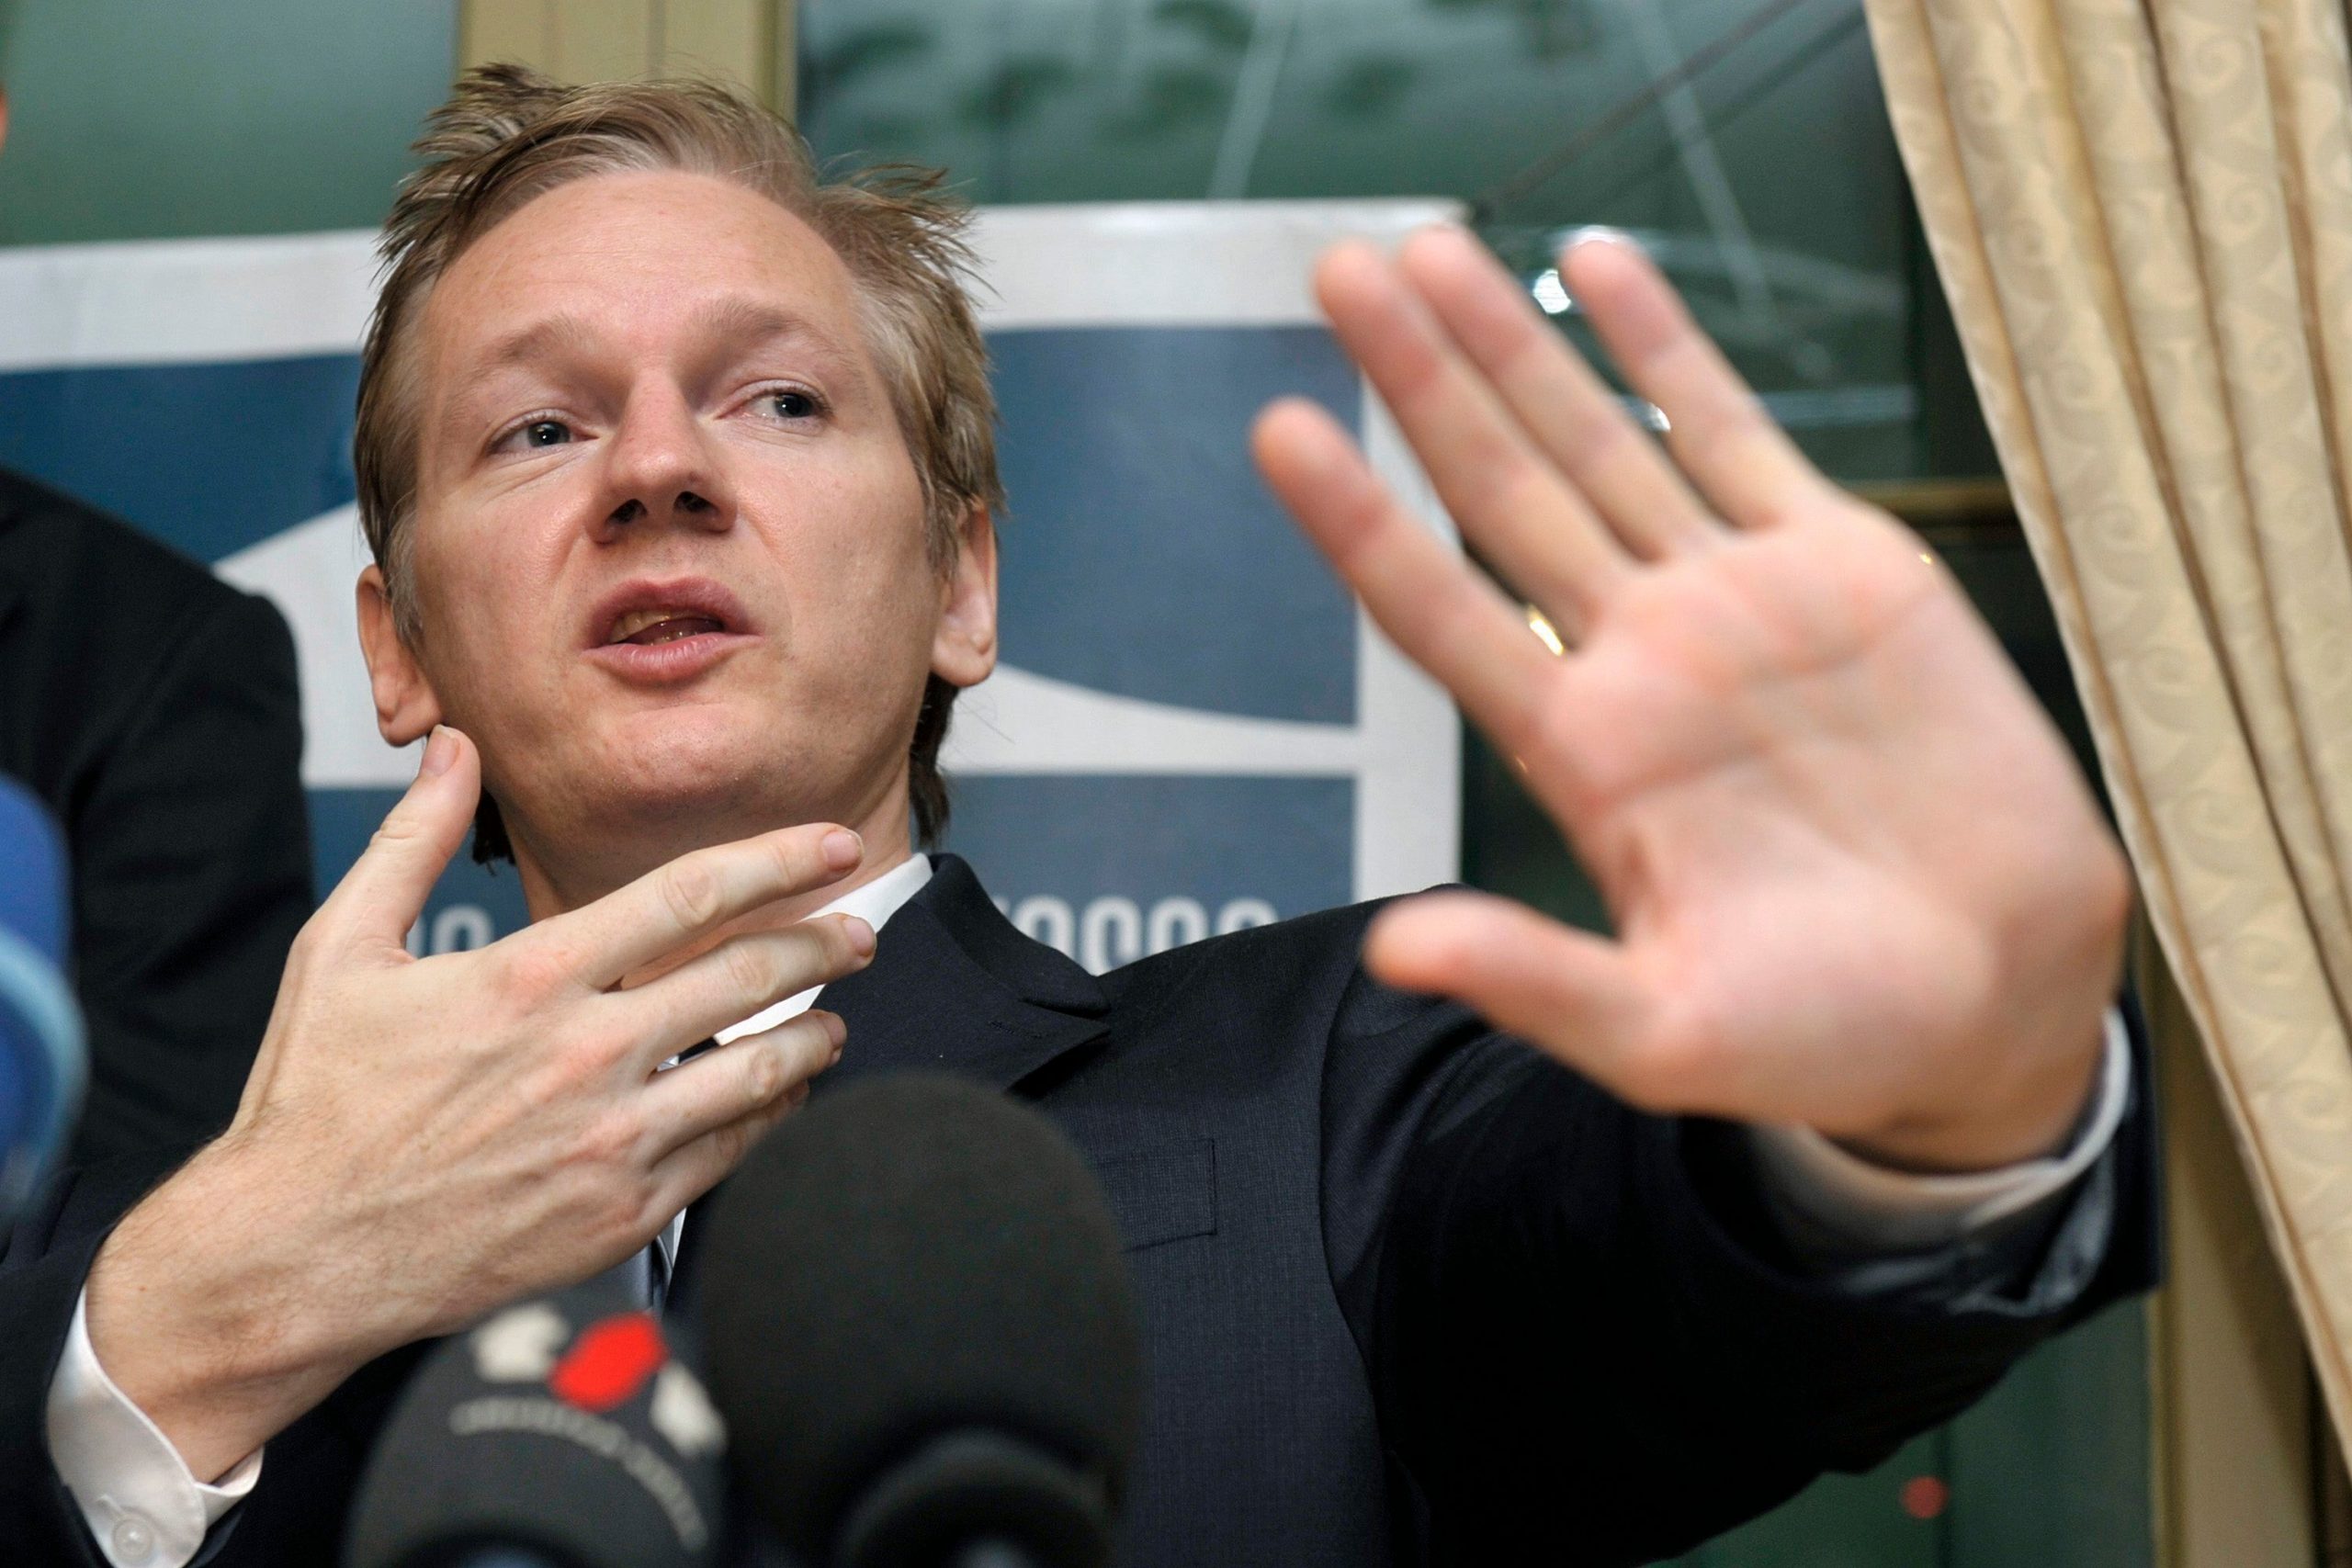 UK decision to block Julian Assange extradition challenged by US lawyers